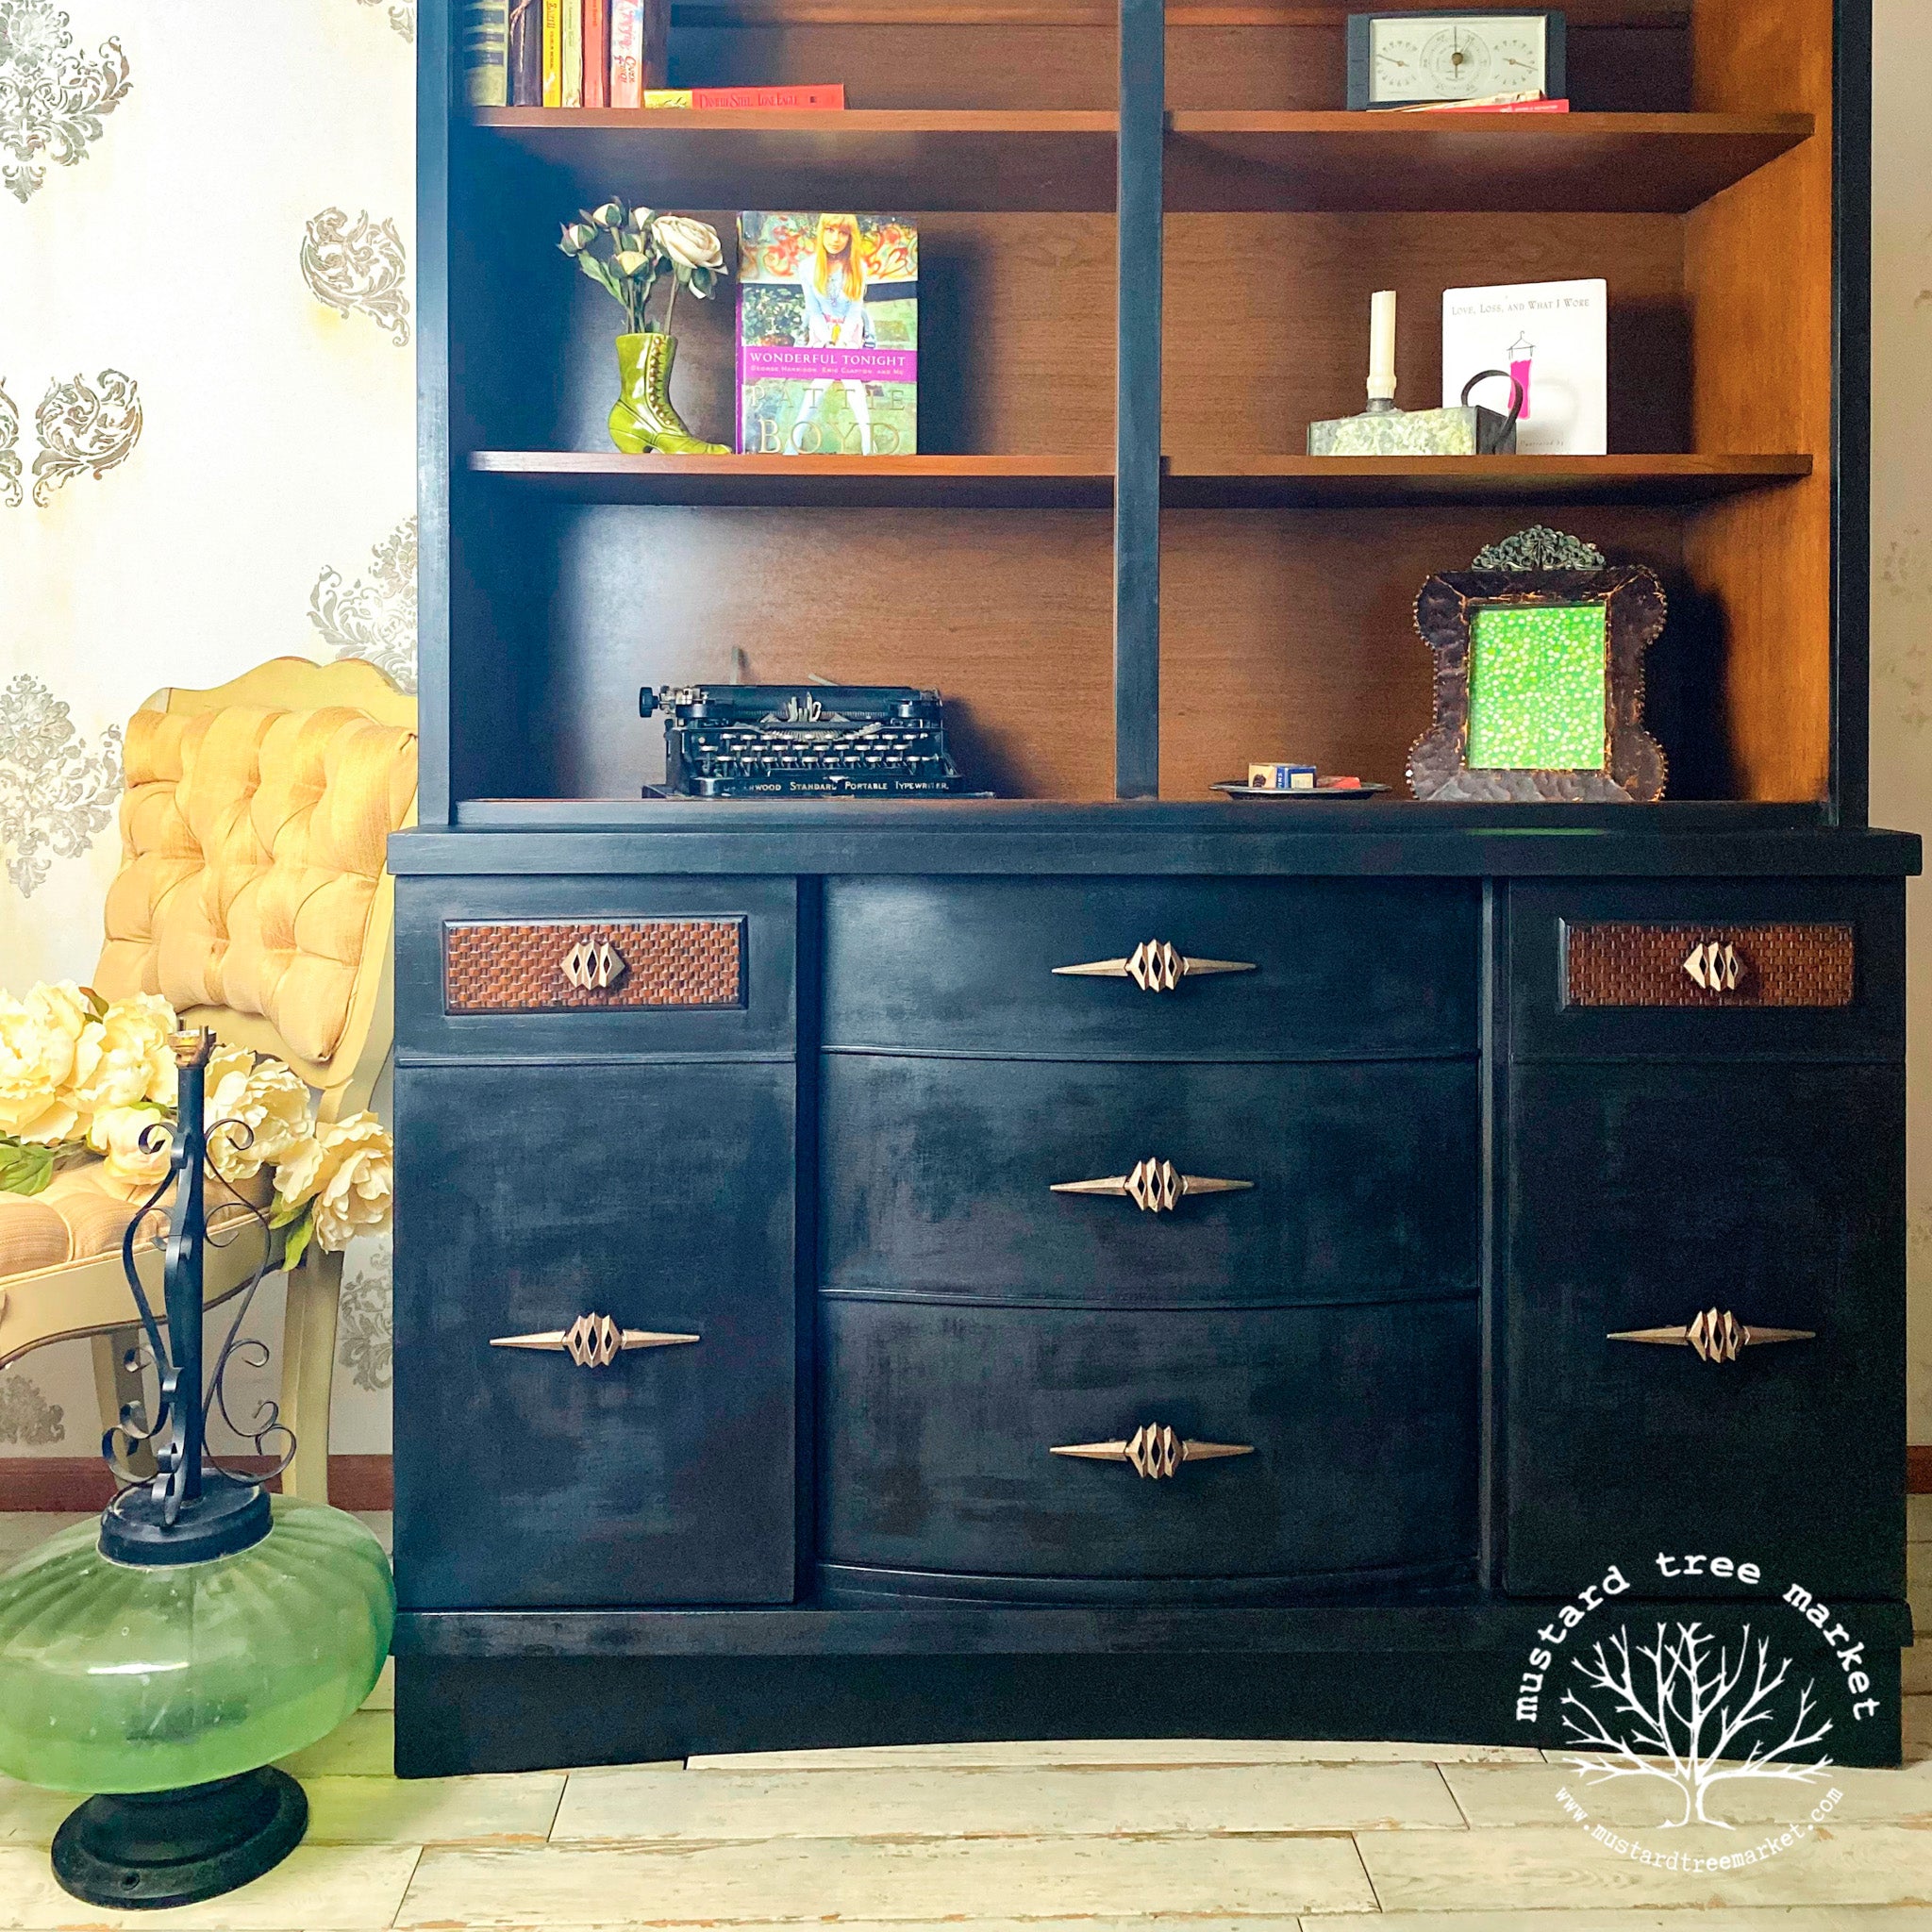 A vintage hutch refurbished by Mustard Tree Market is painted in Dixie Belle's Midnight Sky chalk mineral paint. The inside of the hutch is natural brown wood.